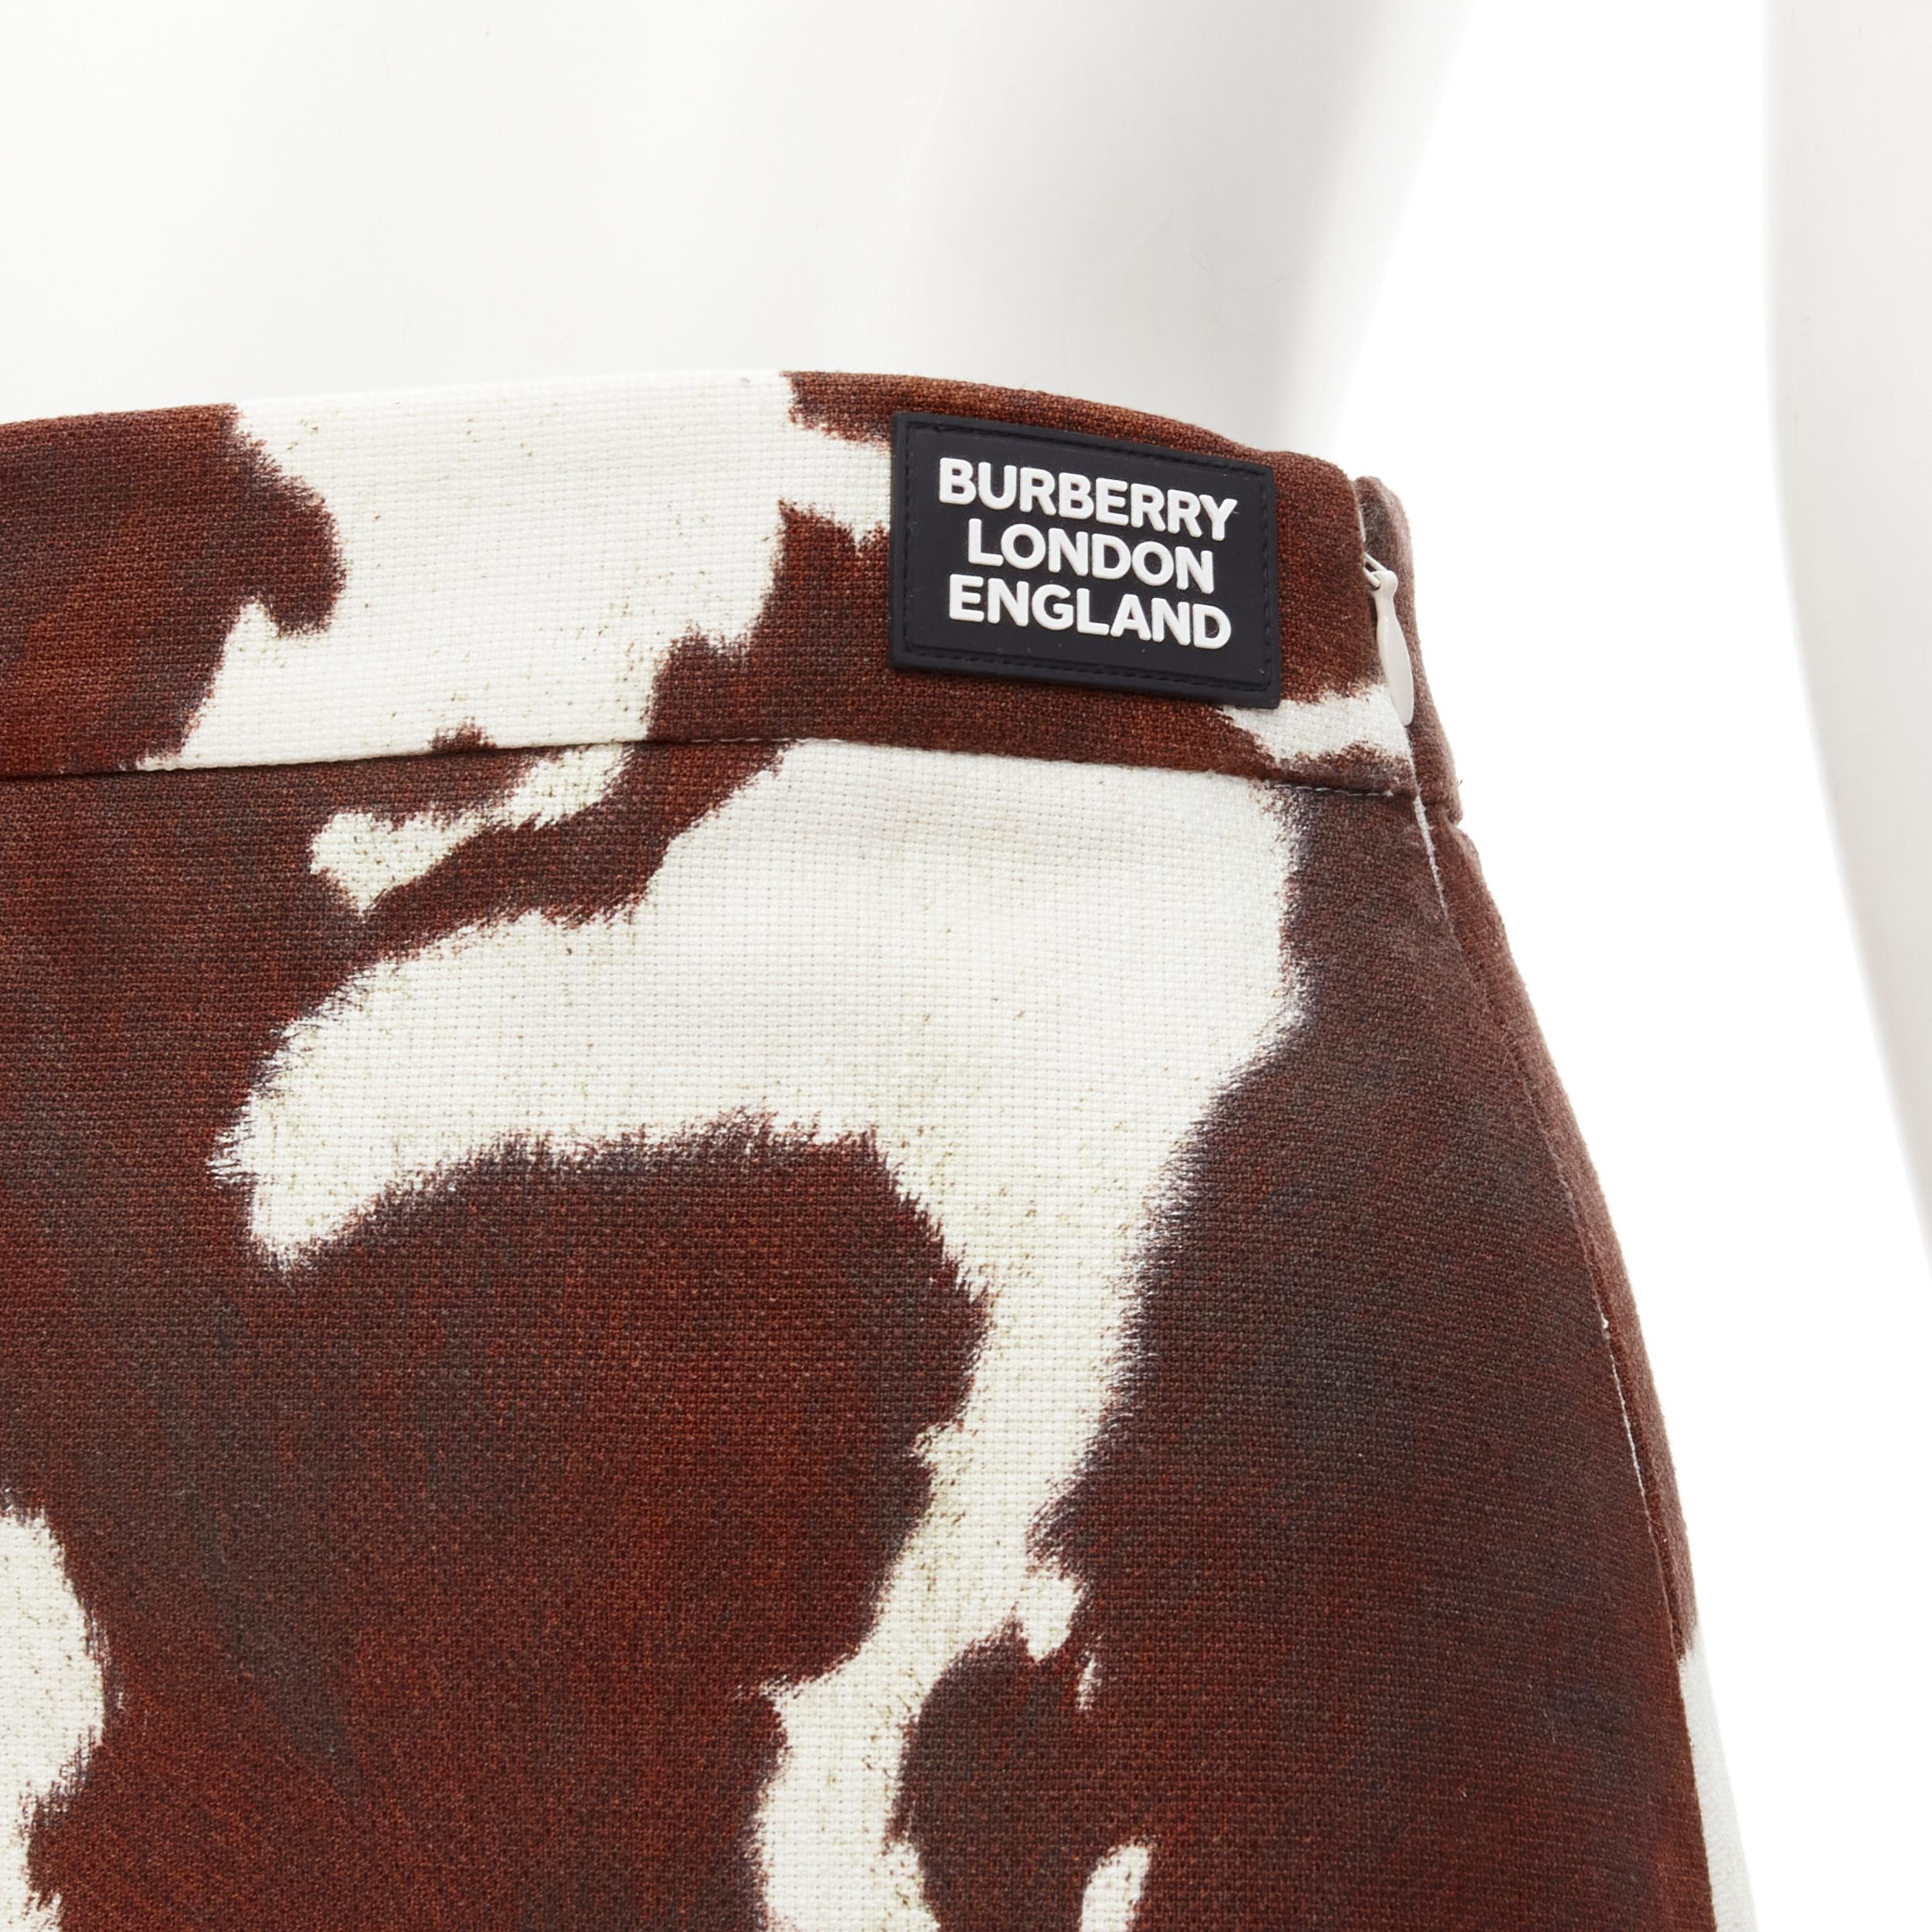 BURBERRY Riccardo Tisci brown cow print leg garter mini skirt S
Brand: Burberry
Extra Detail: Attached leg garter strap. Burberry London England rubber logo patch at front waist. Side zip closure.

CONDITION:
Condition: Excellent, this item was